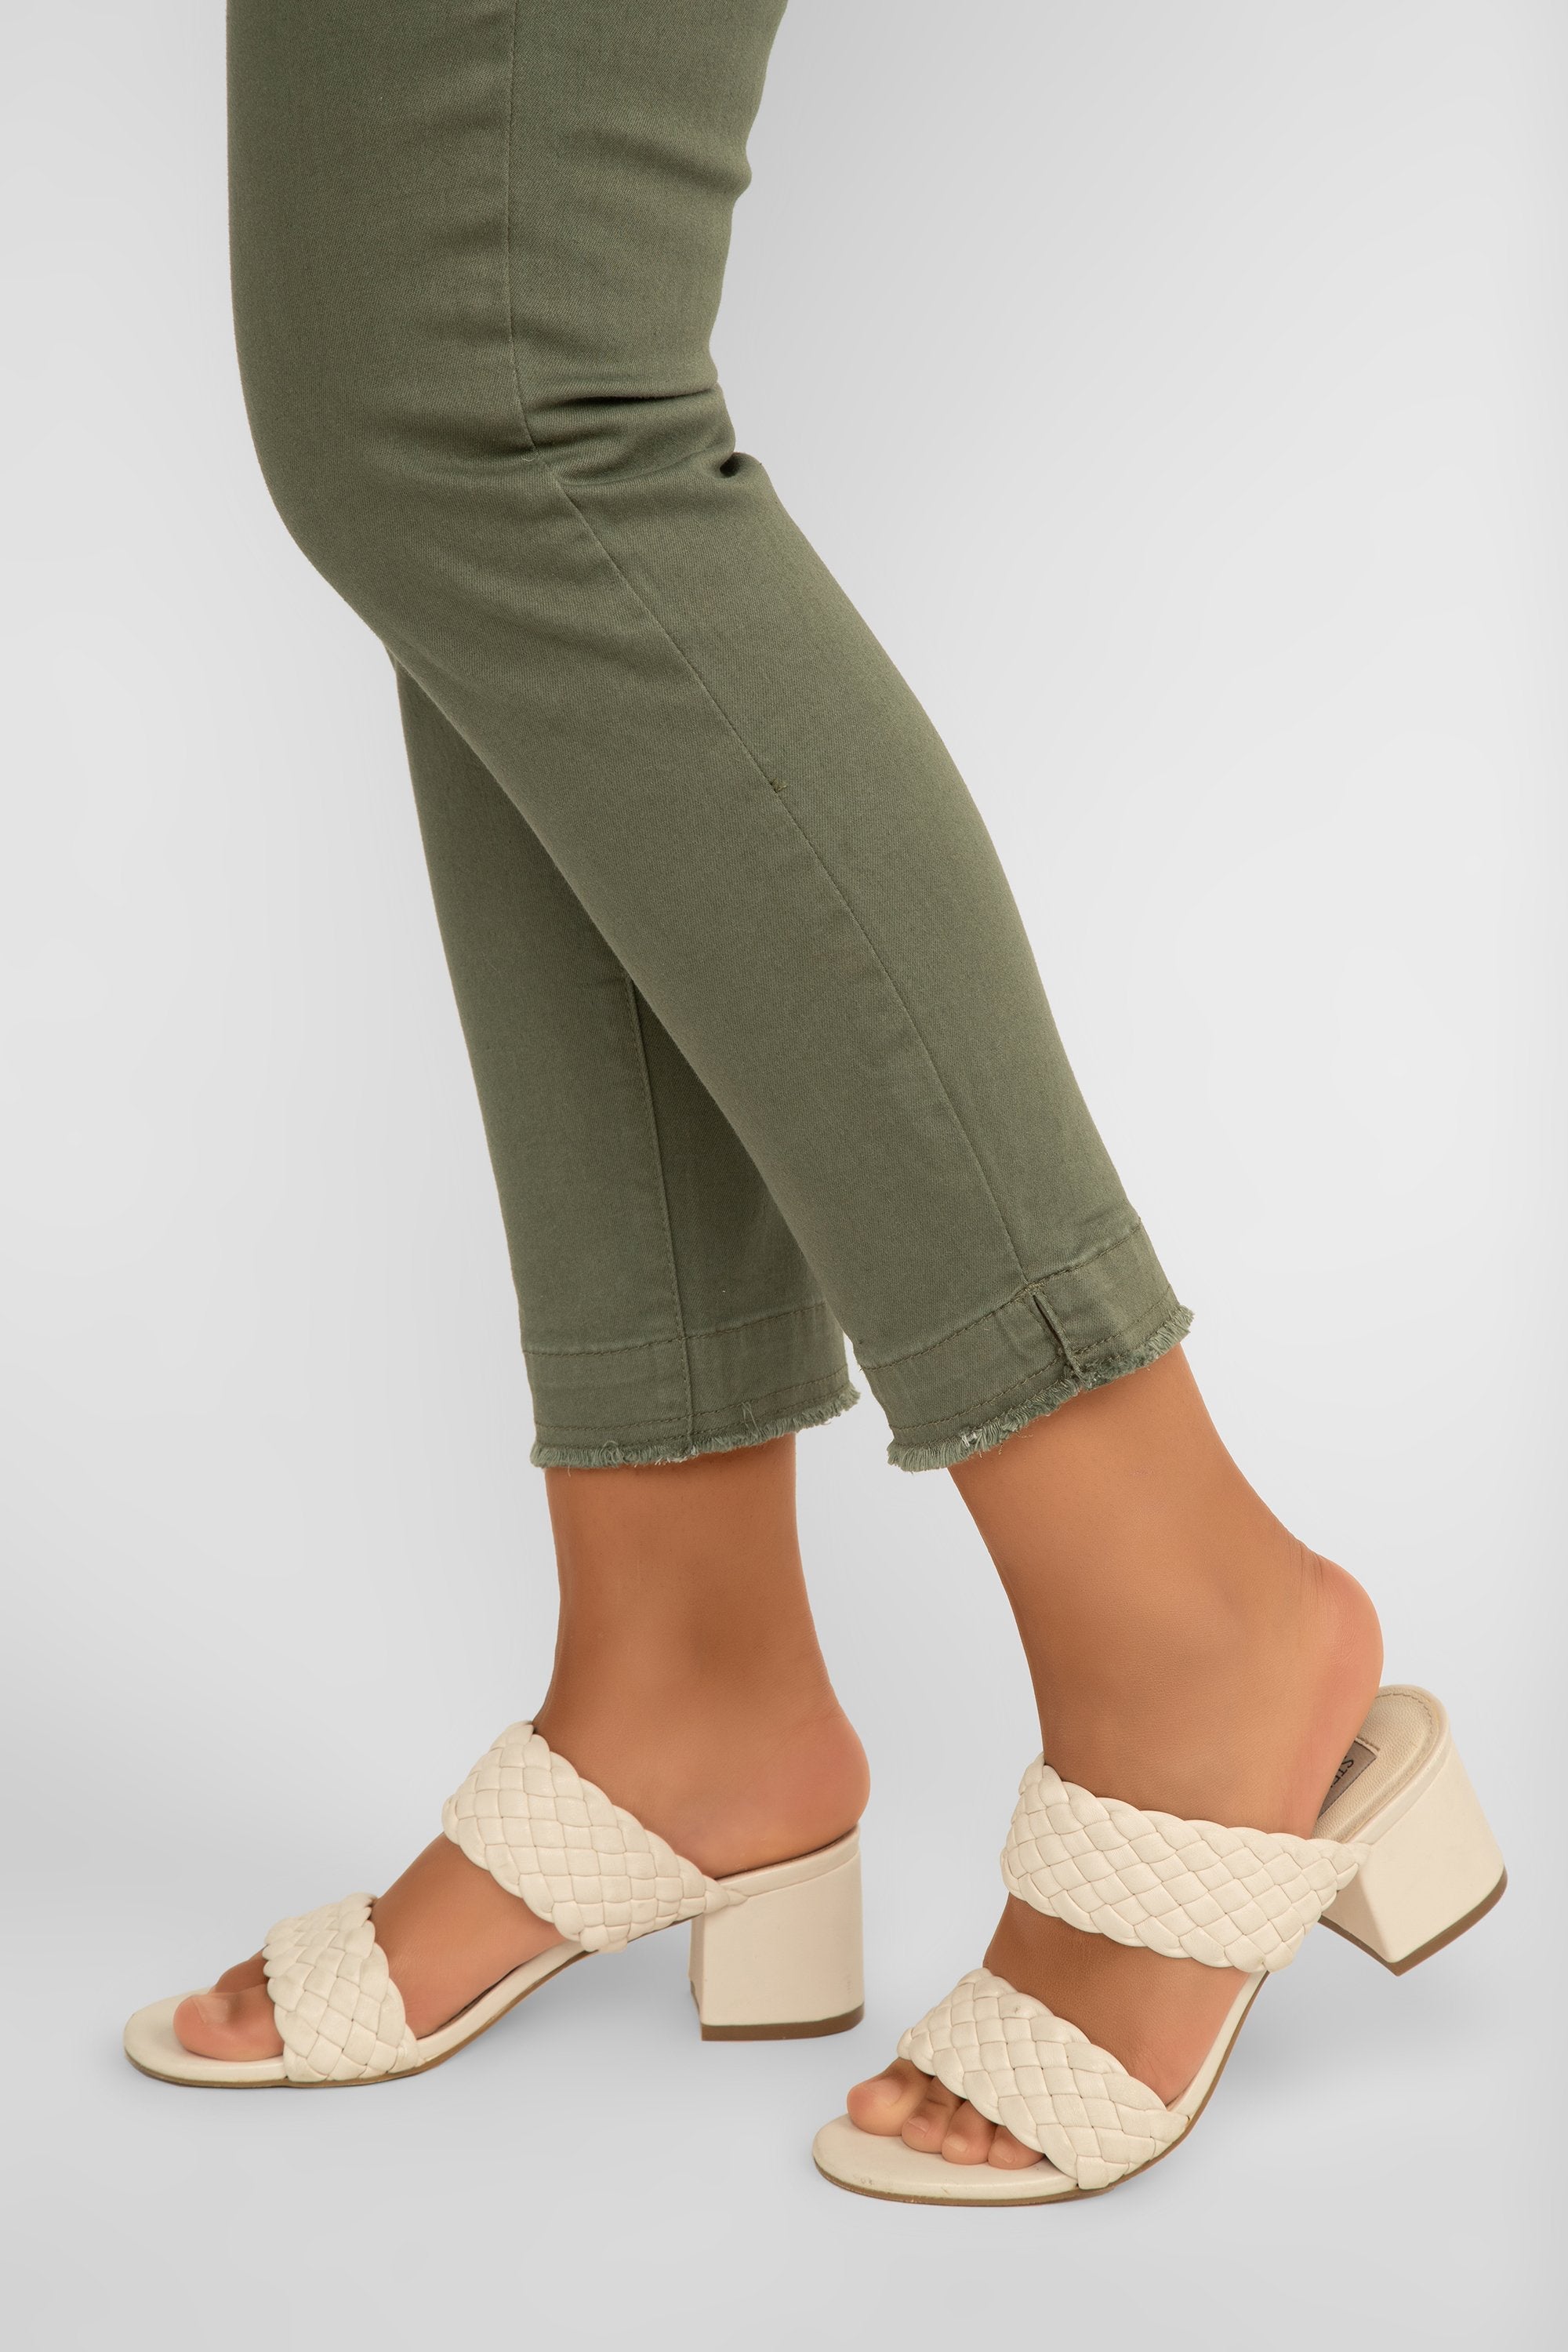 Picadilly (J6051) Women's Slim Fit, Cropped Jeans with Frayed Hem in Khaki Green